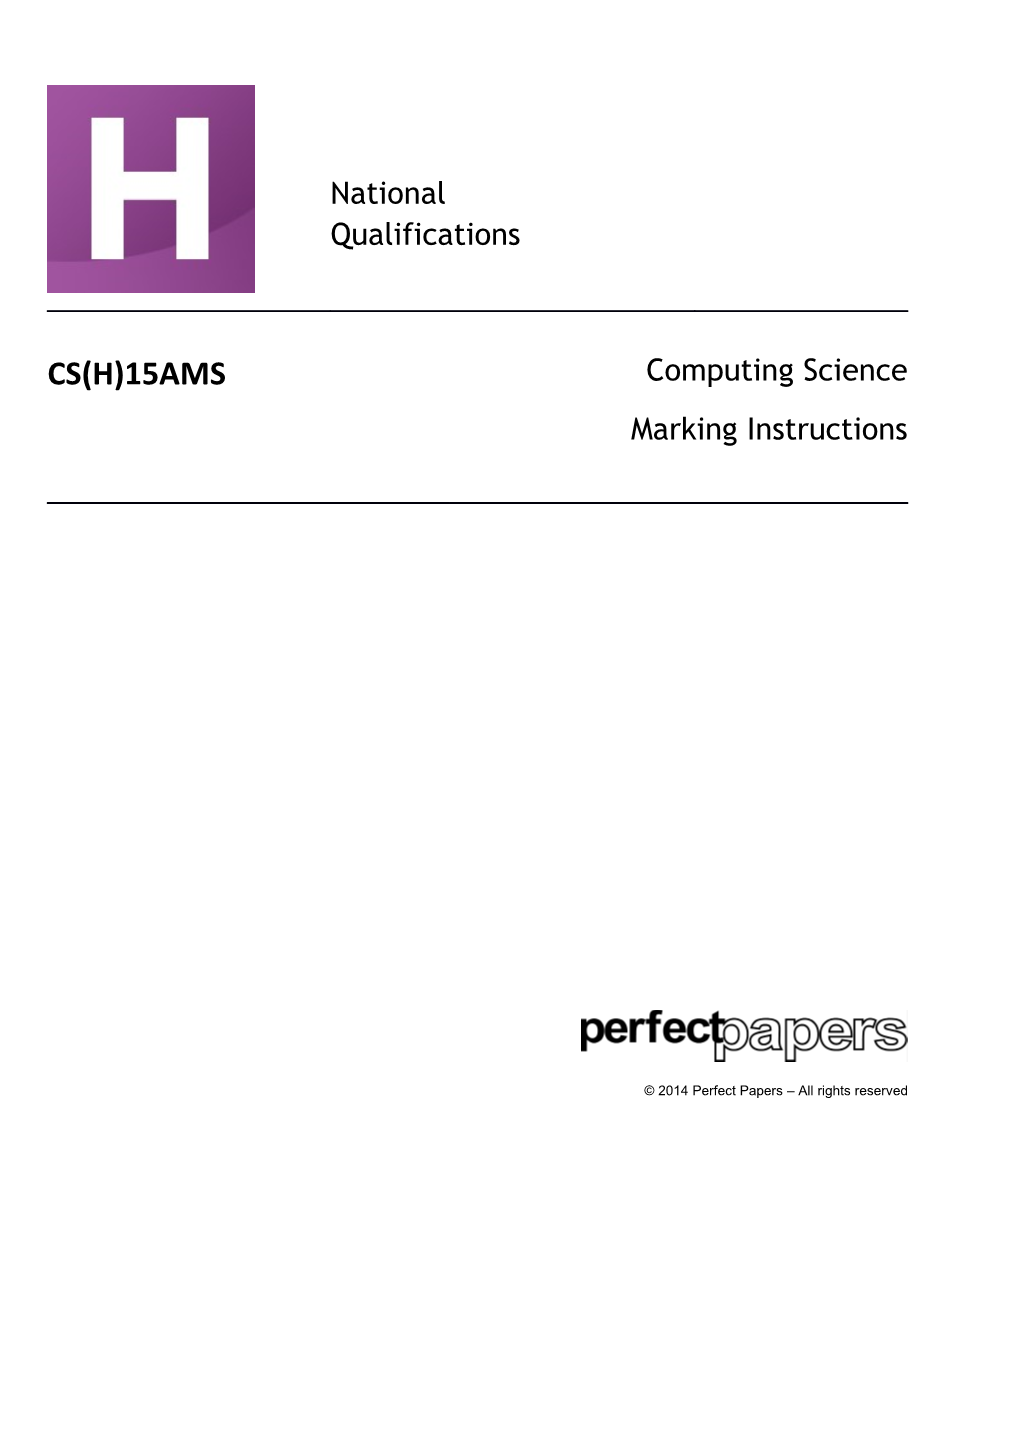 General Marking Principles for Higher Computing Science